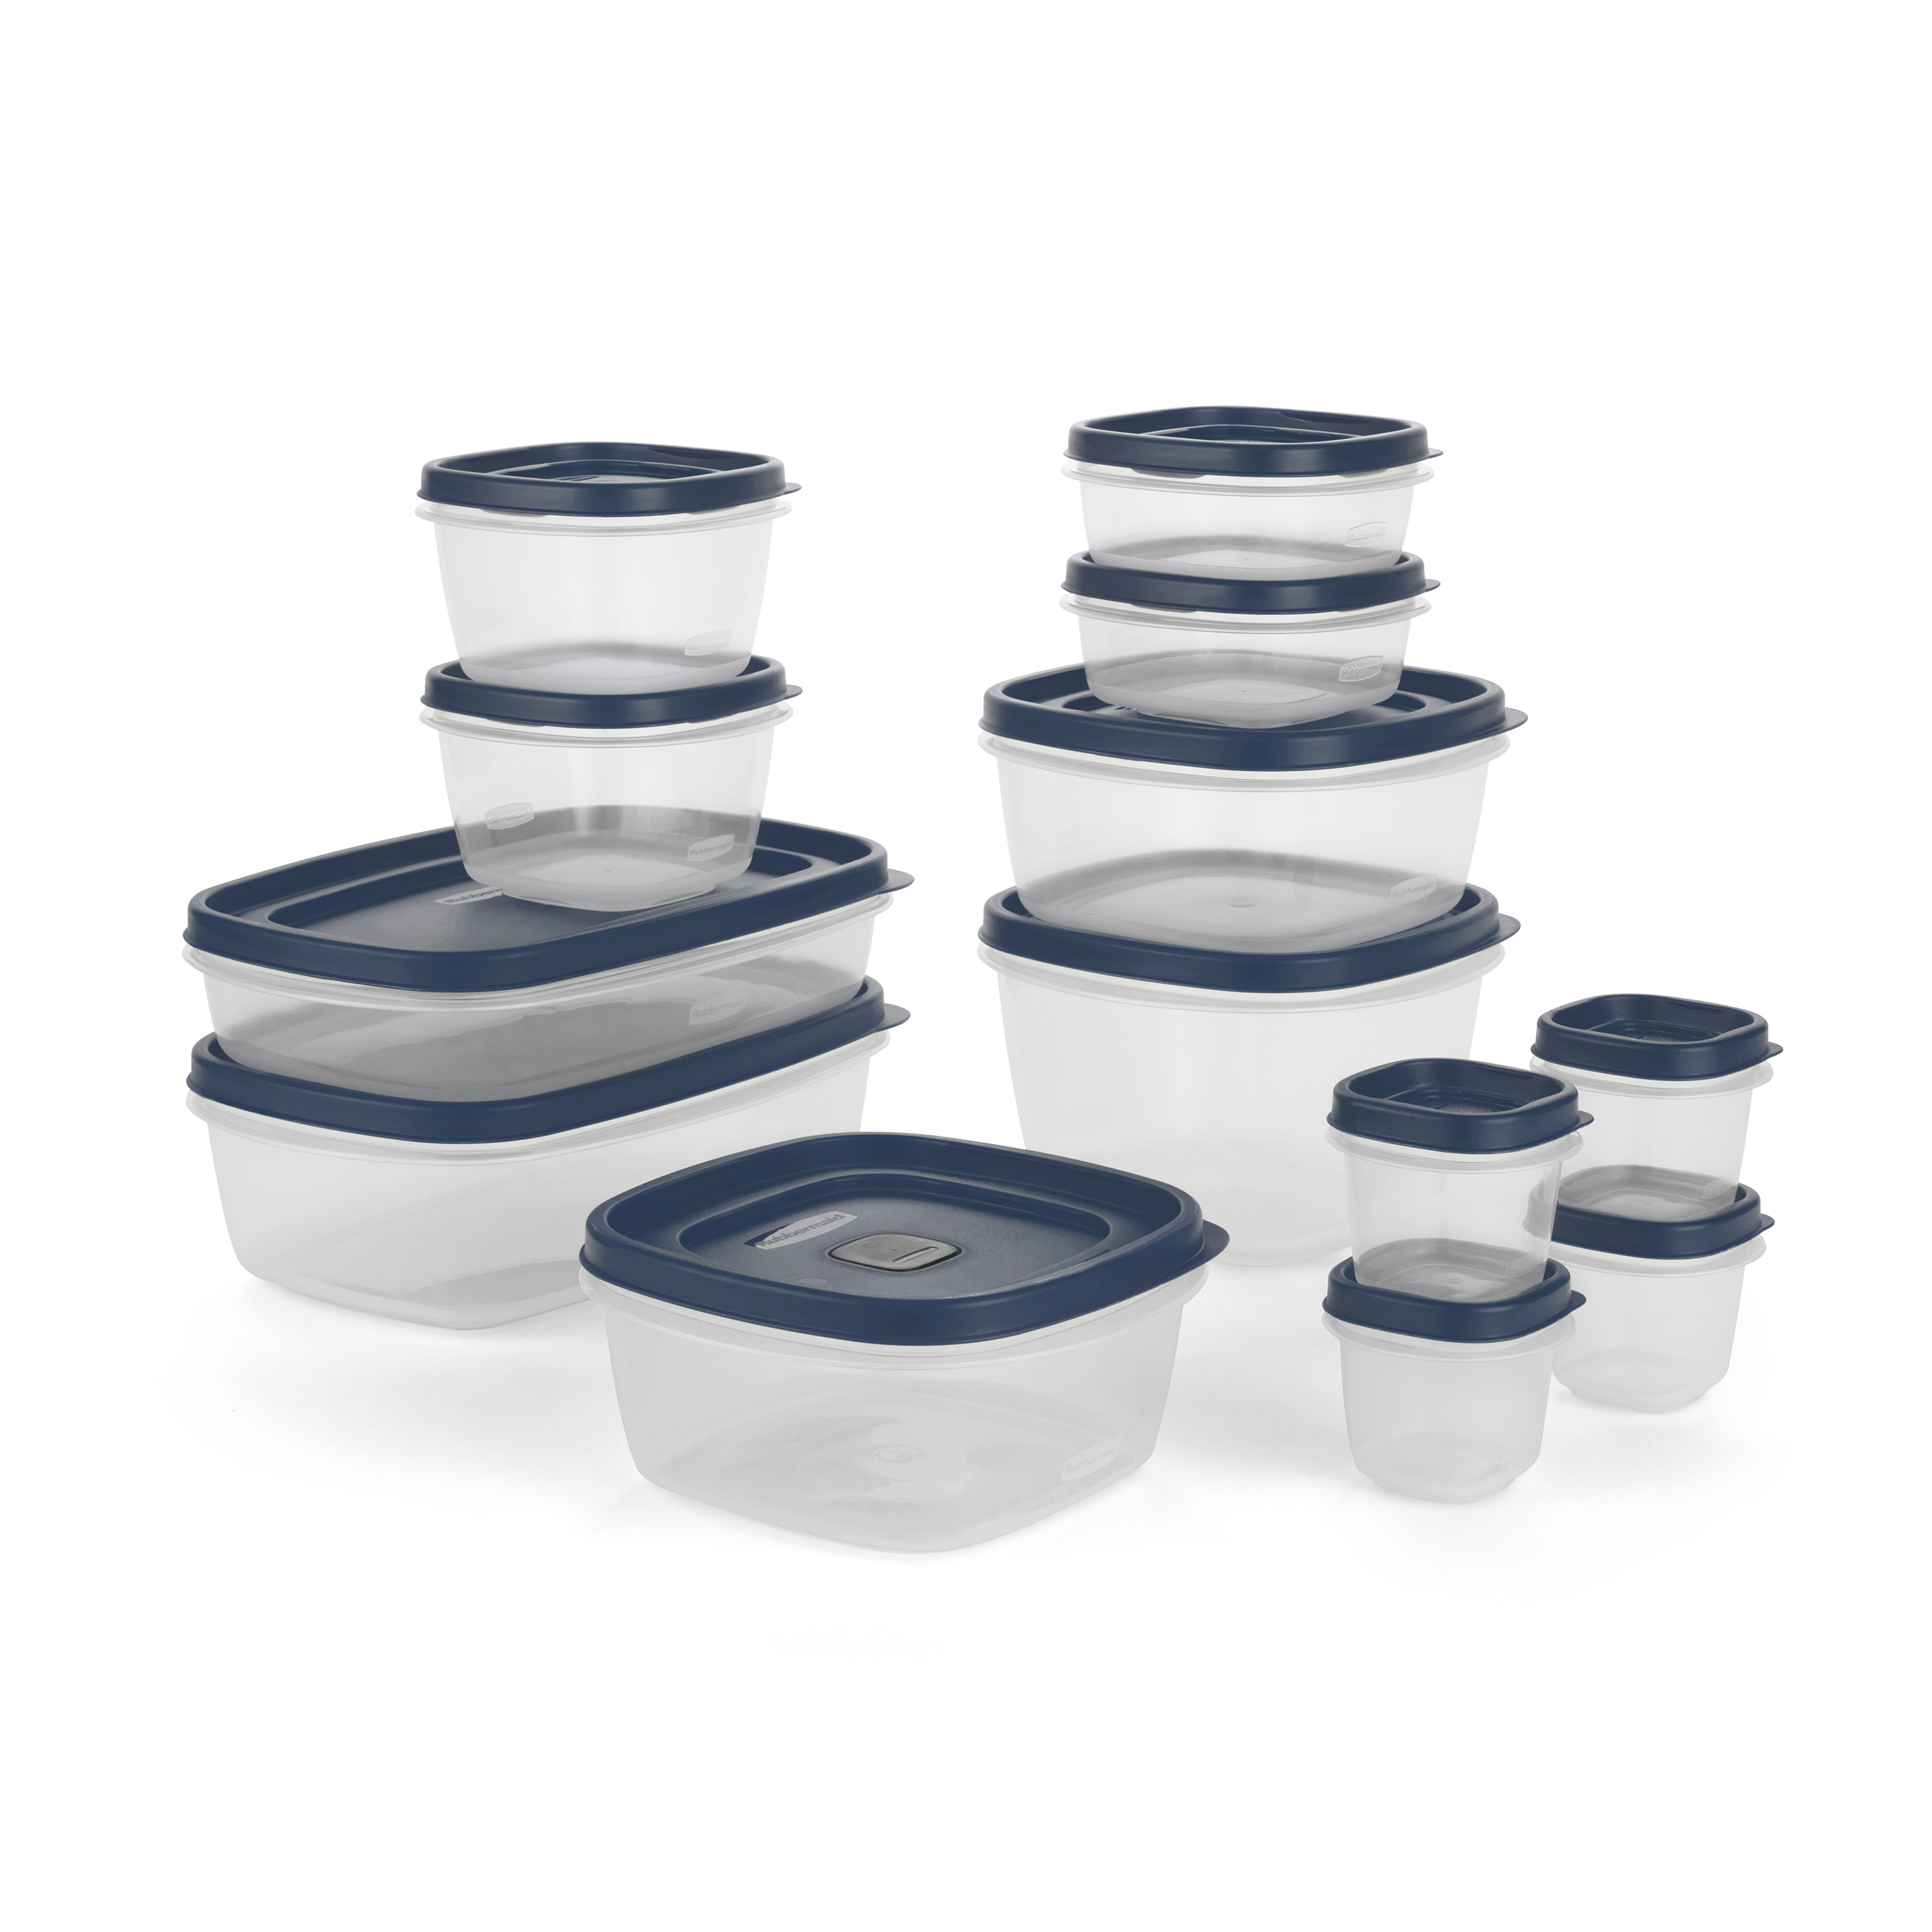 Rubbermaid EasyFindLids Variety Set of 13 Vented Plastic Food Storage Containers with Navy Lids (26 Pieces Total) - image 1 of 7